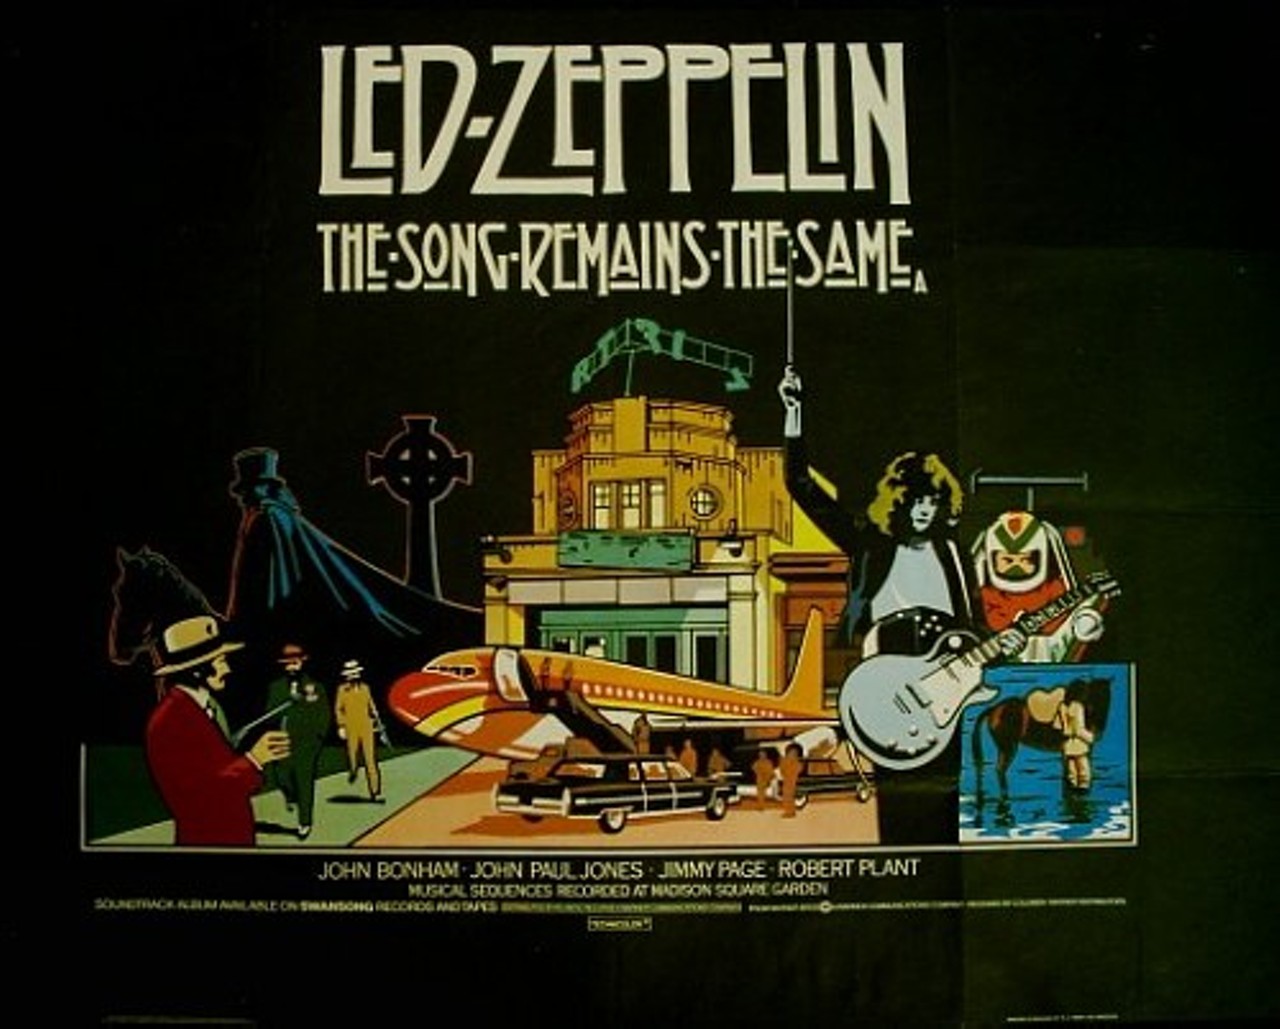 Led Zeppelin → The Song Remains The Same